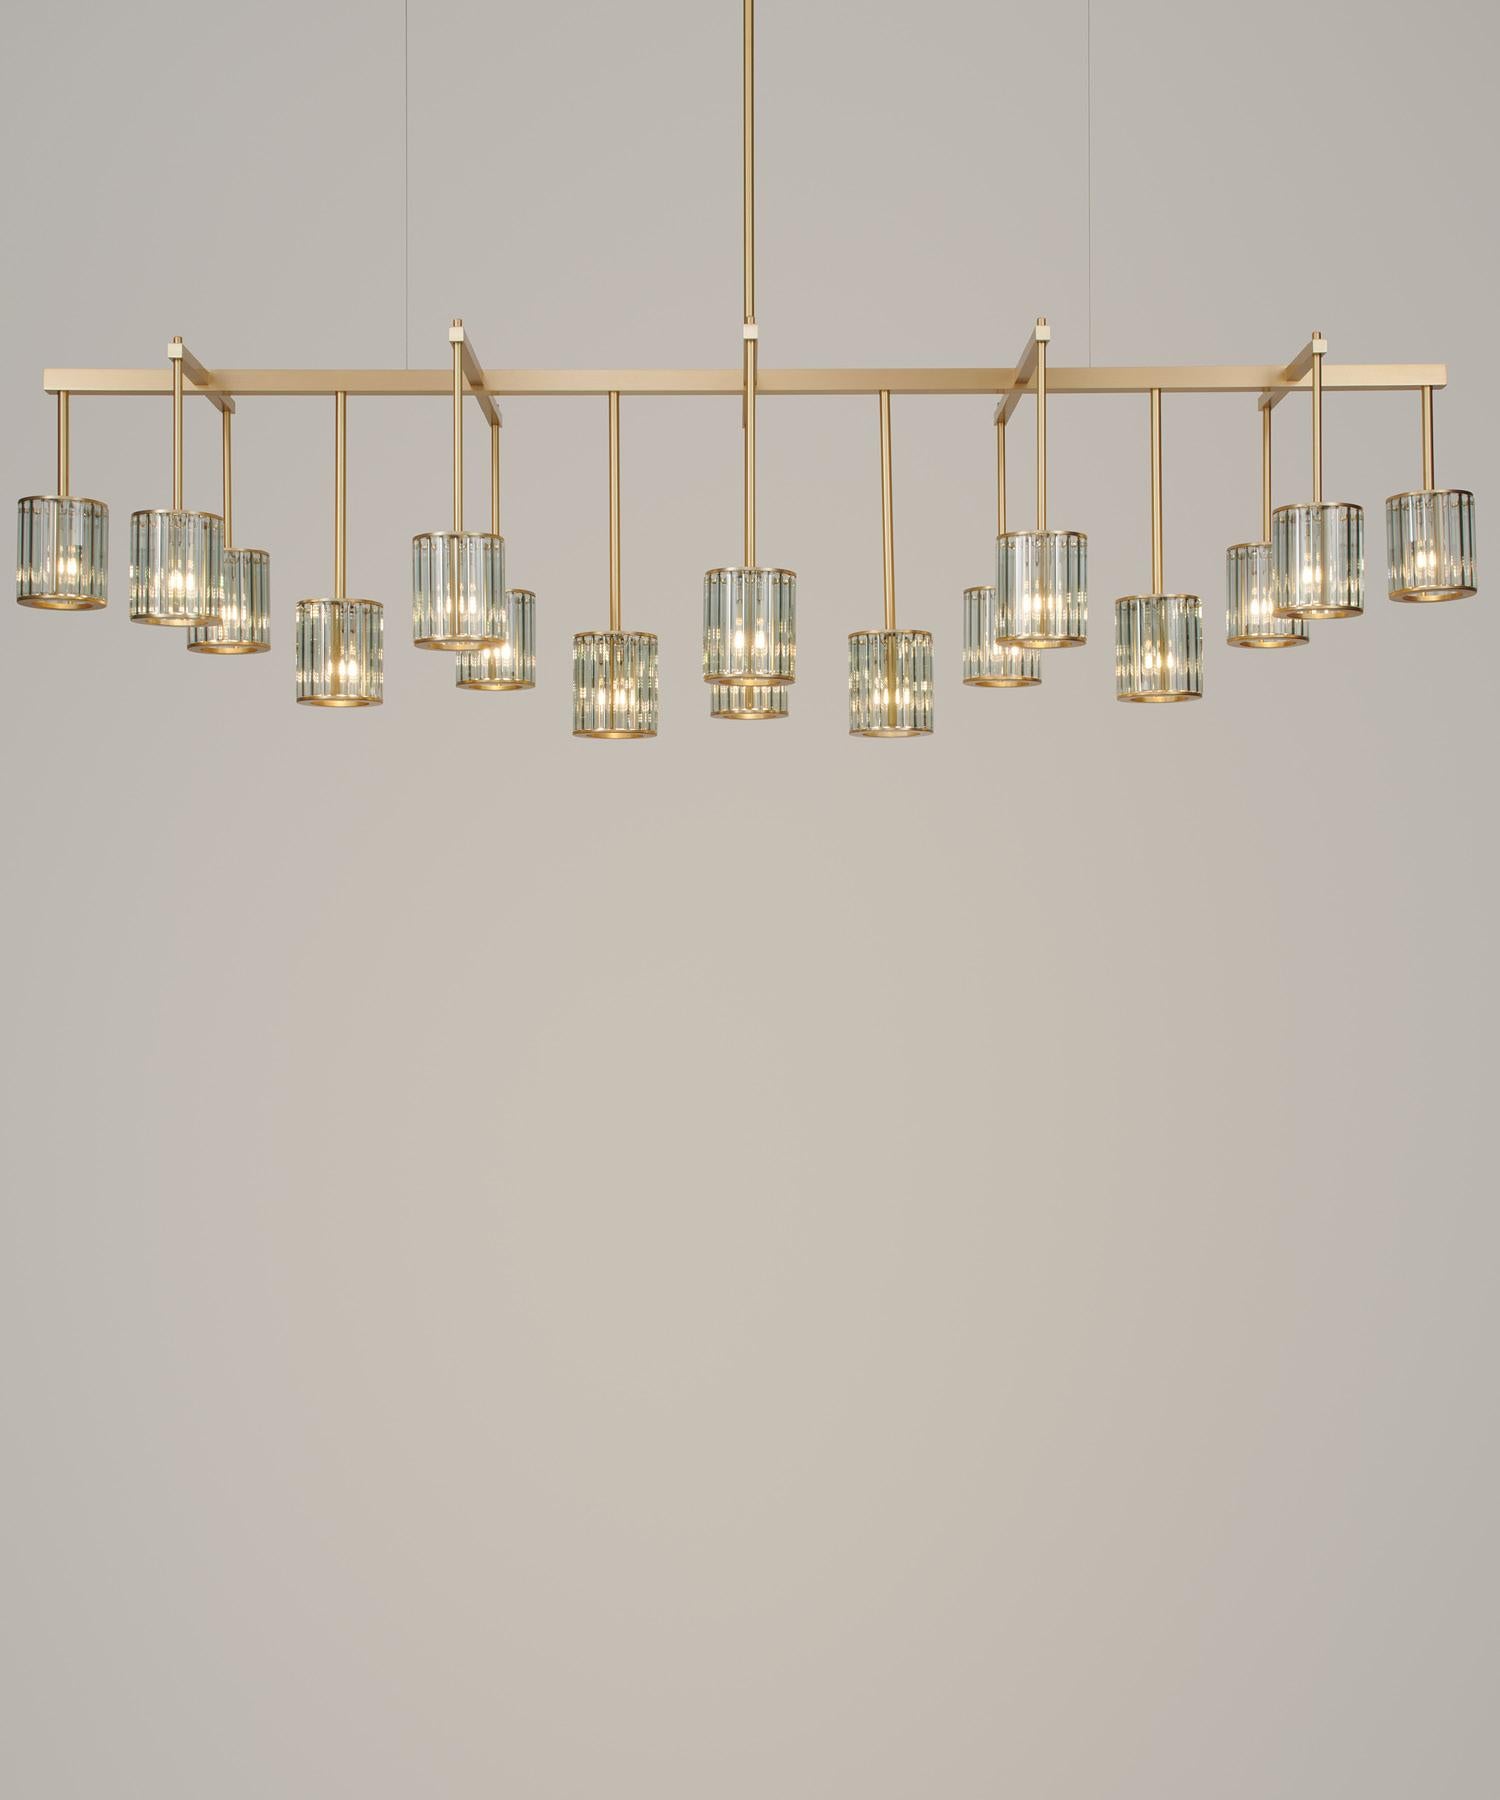 The largest member of the Flute family, the Flute Beam Chandelier is available in two standard sizes and is perfectly suited to formal dining areas and living spaces. The choice of a rich, brushed-brass finish or powder coated RAL colours, combine